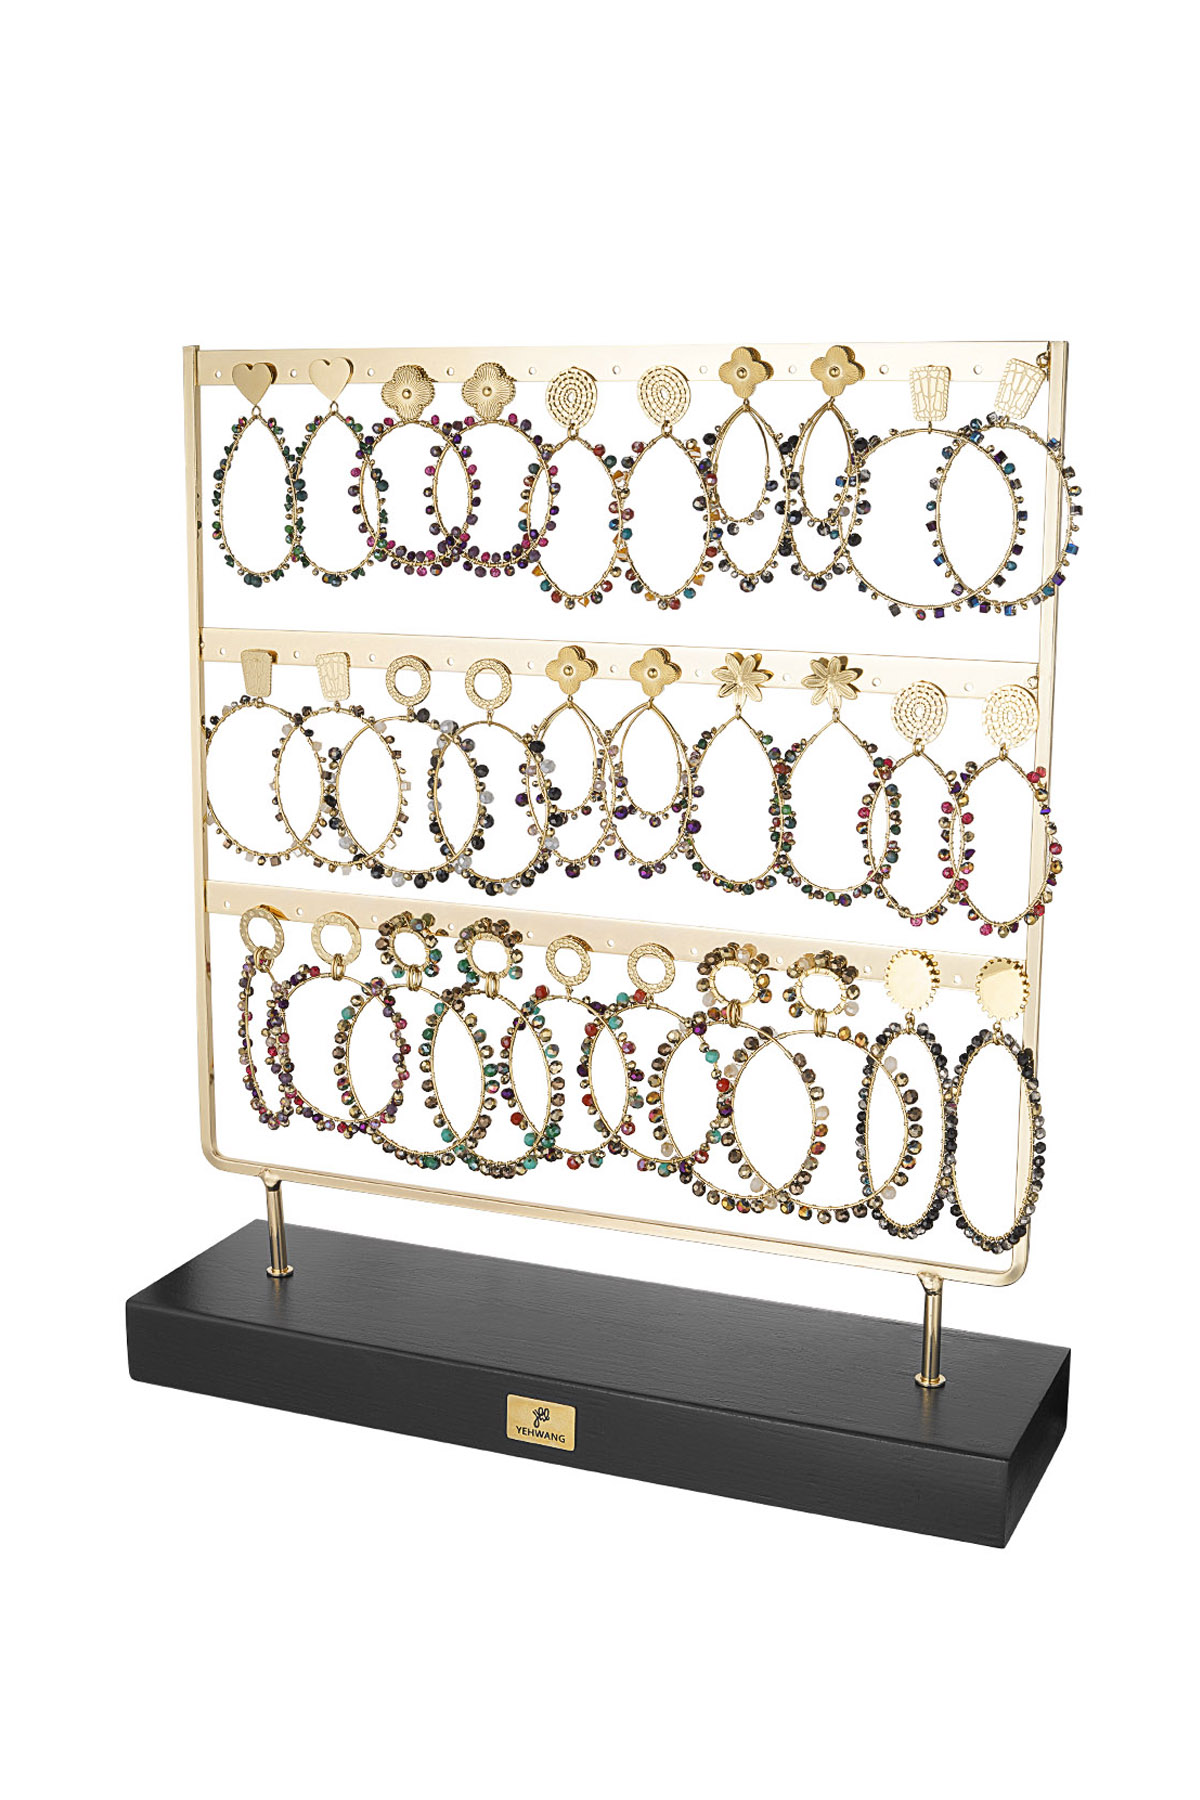 Earrings display with winter essentials - multi h5 